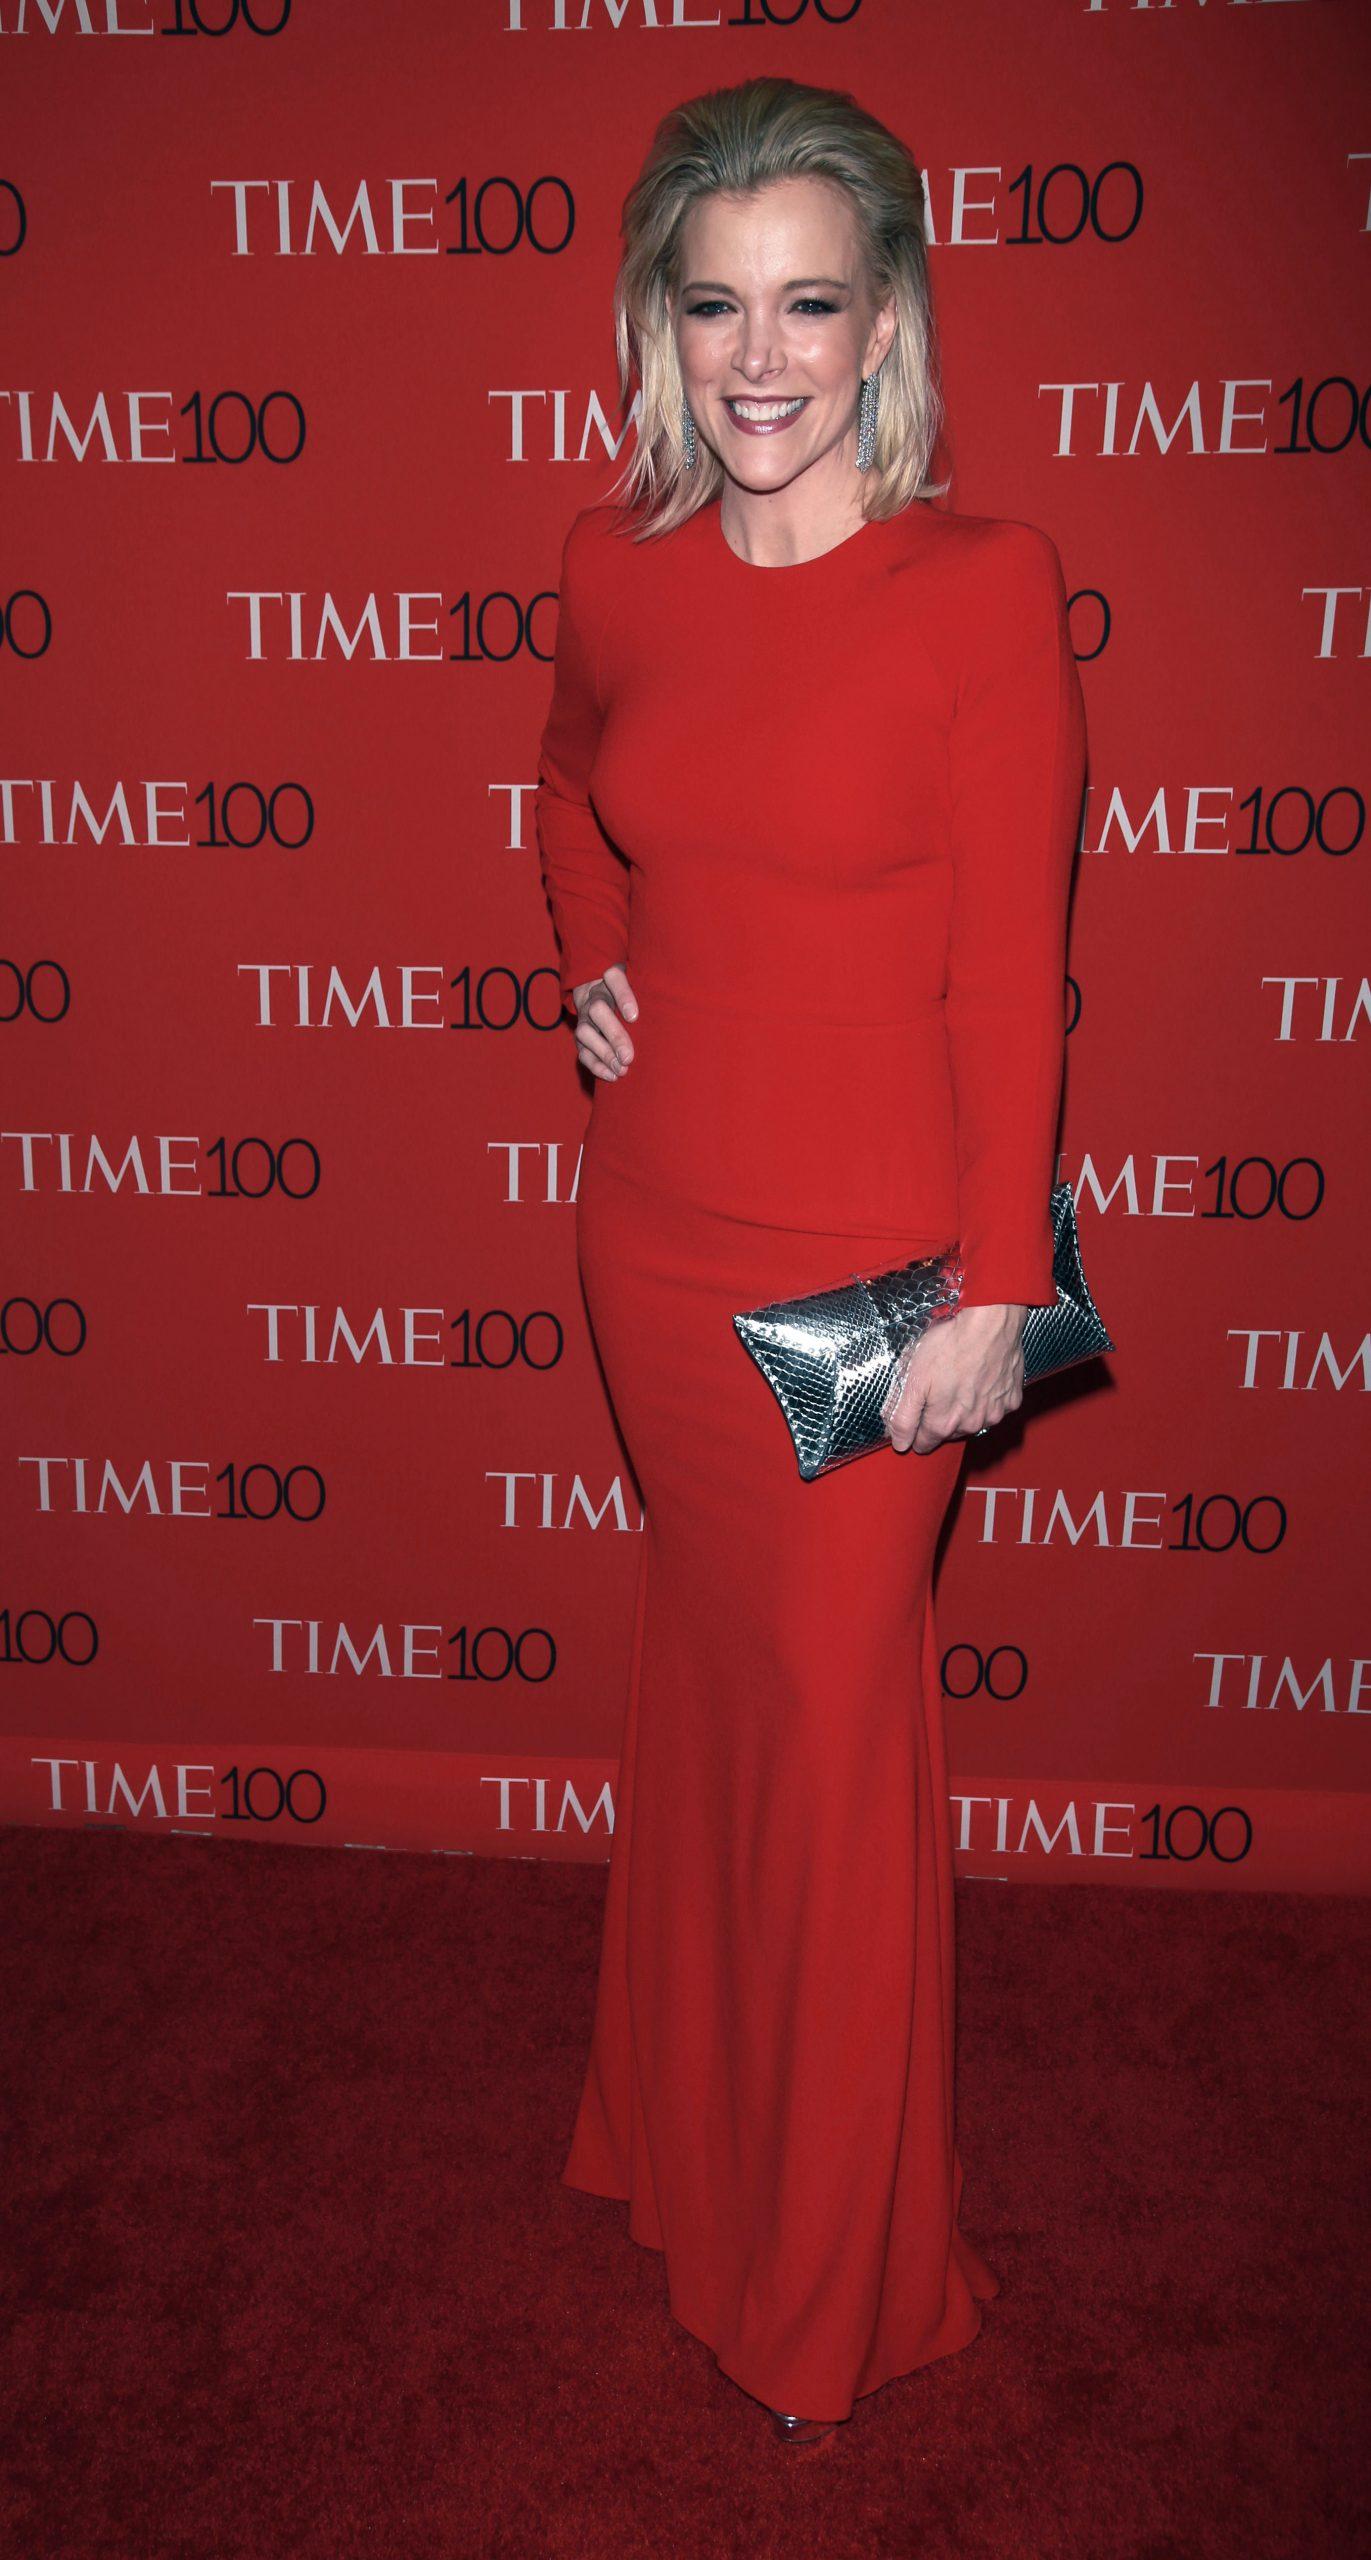 Time 100 Gala arrivals